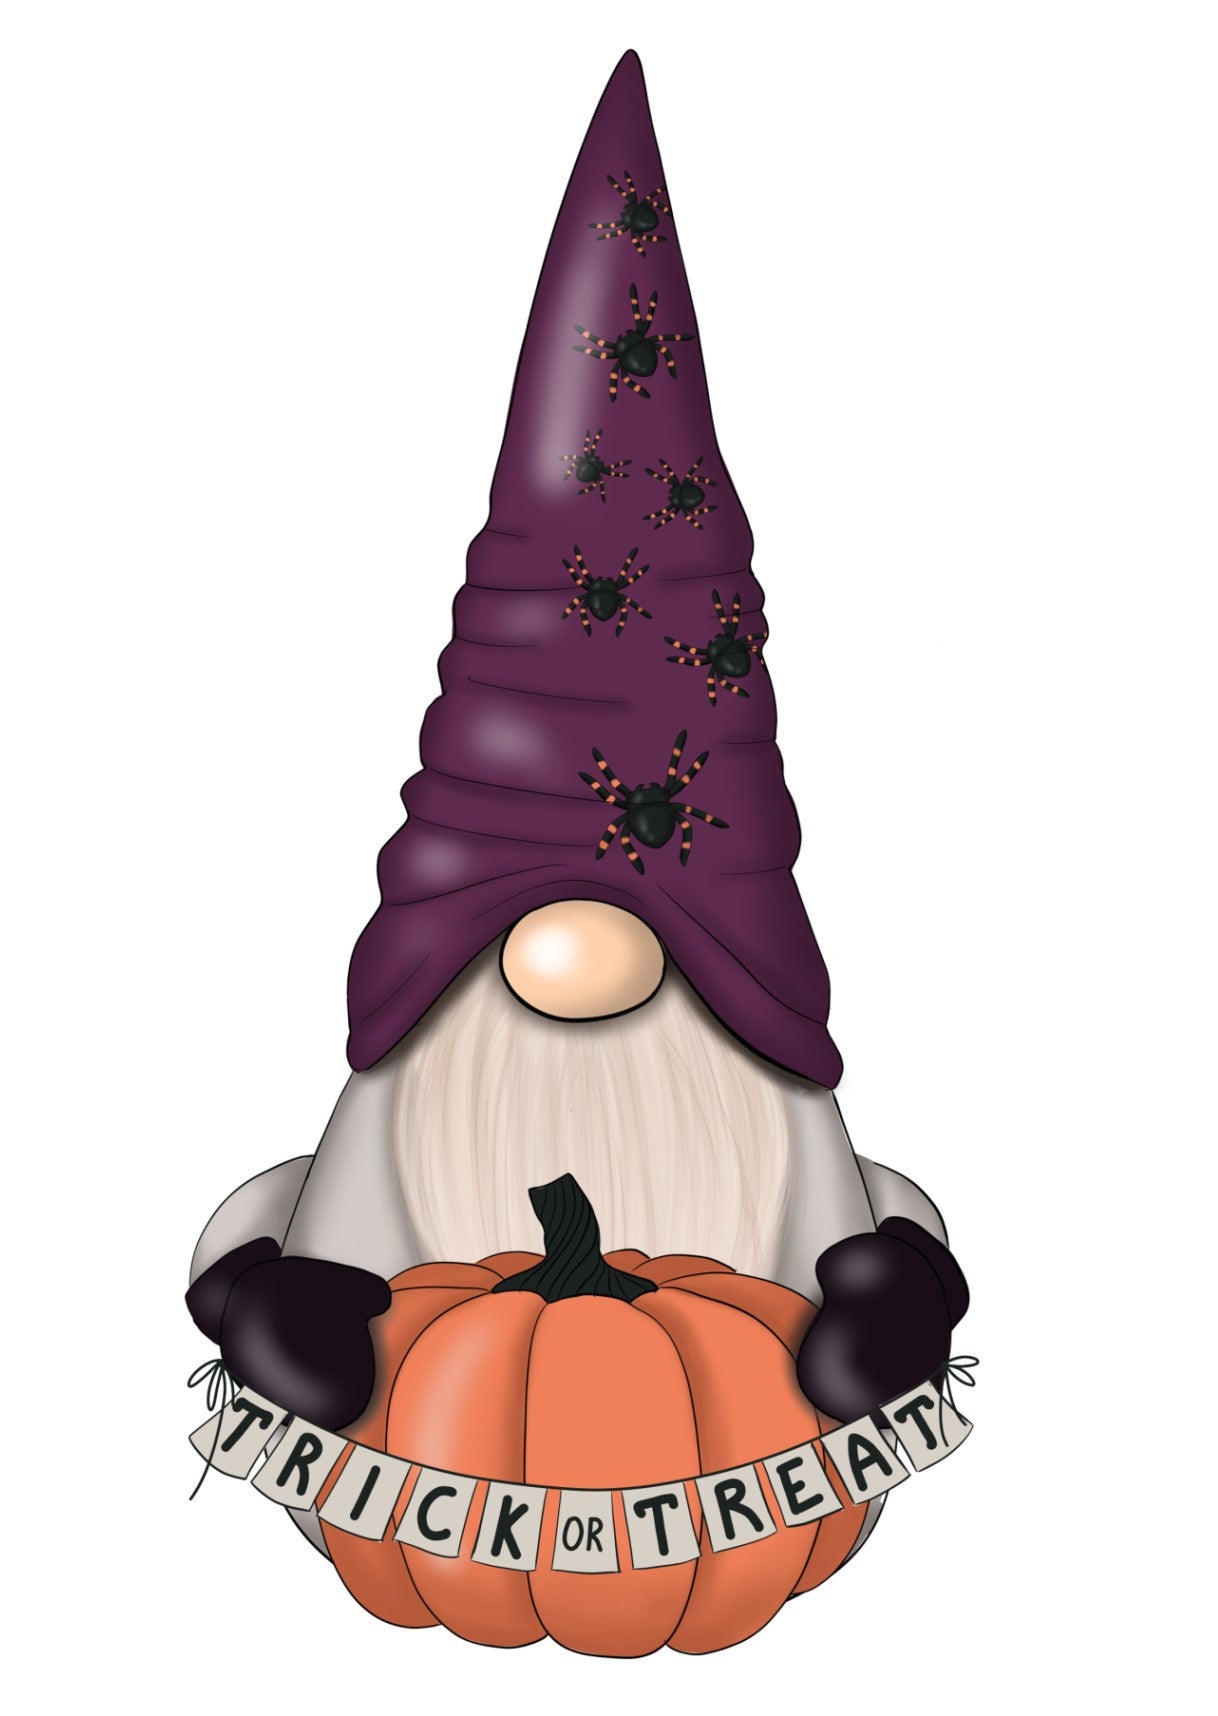 Gnome 'Trick or treat' | Fripperies